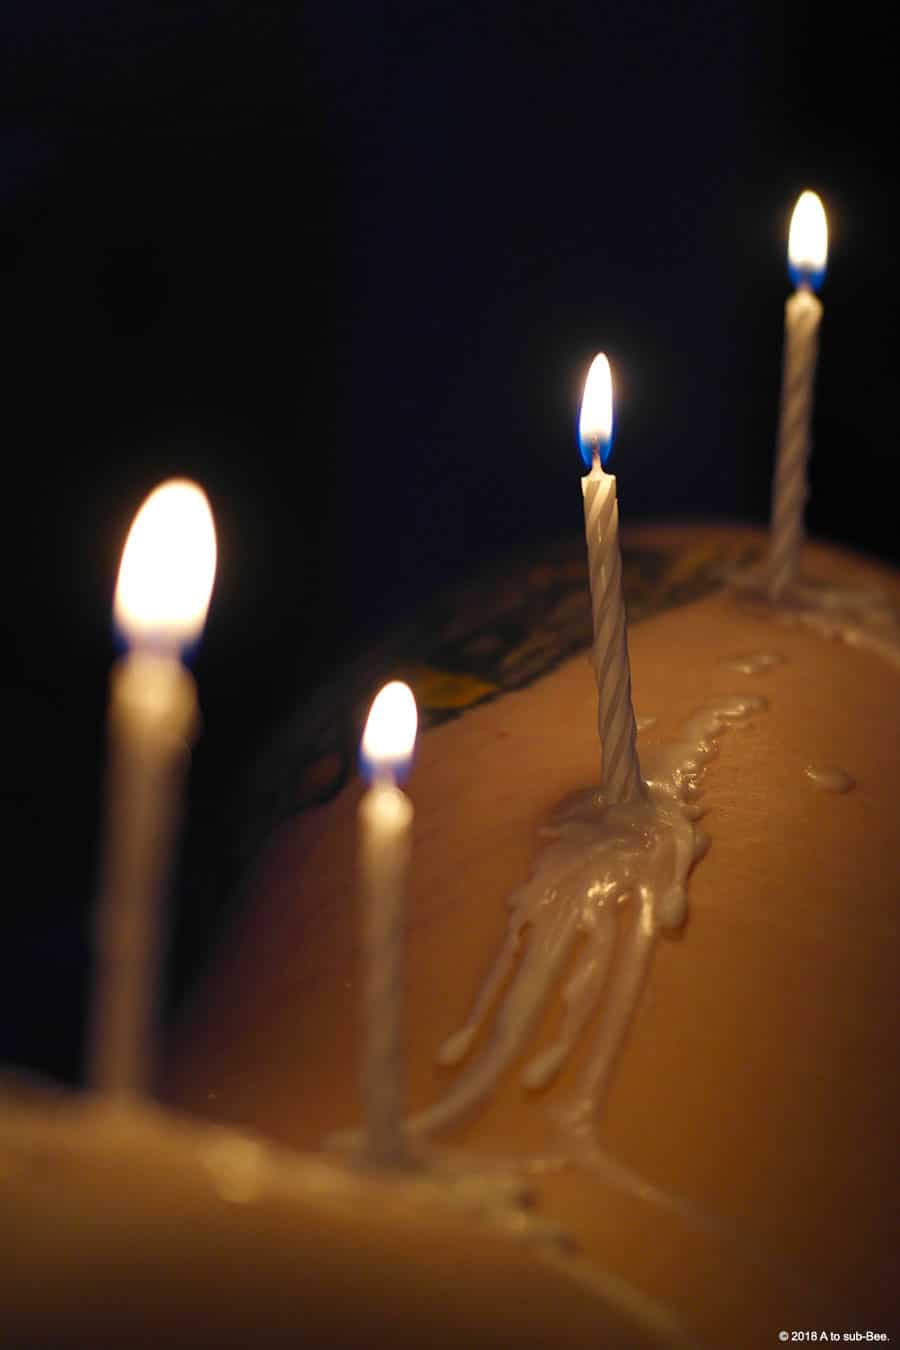 A row of candles melting on Bee's side